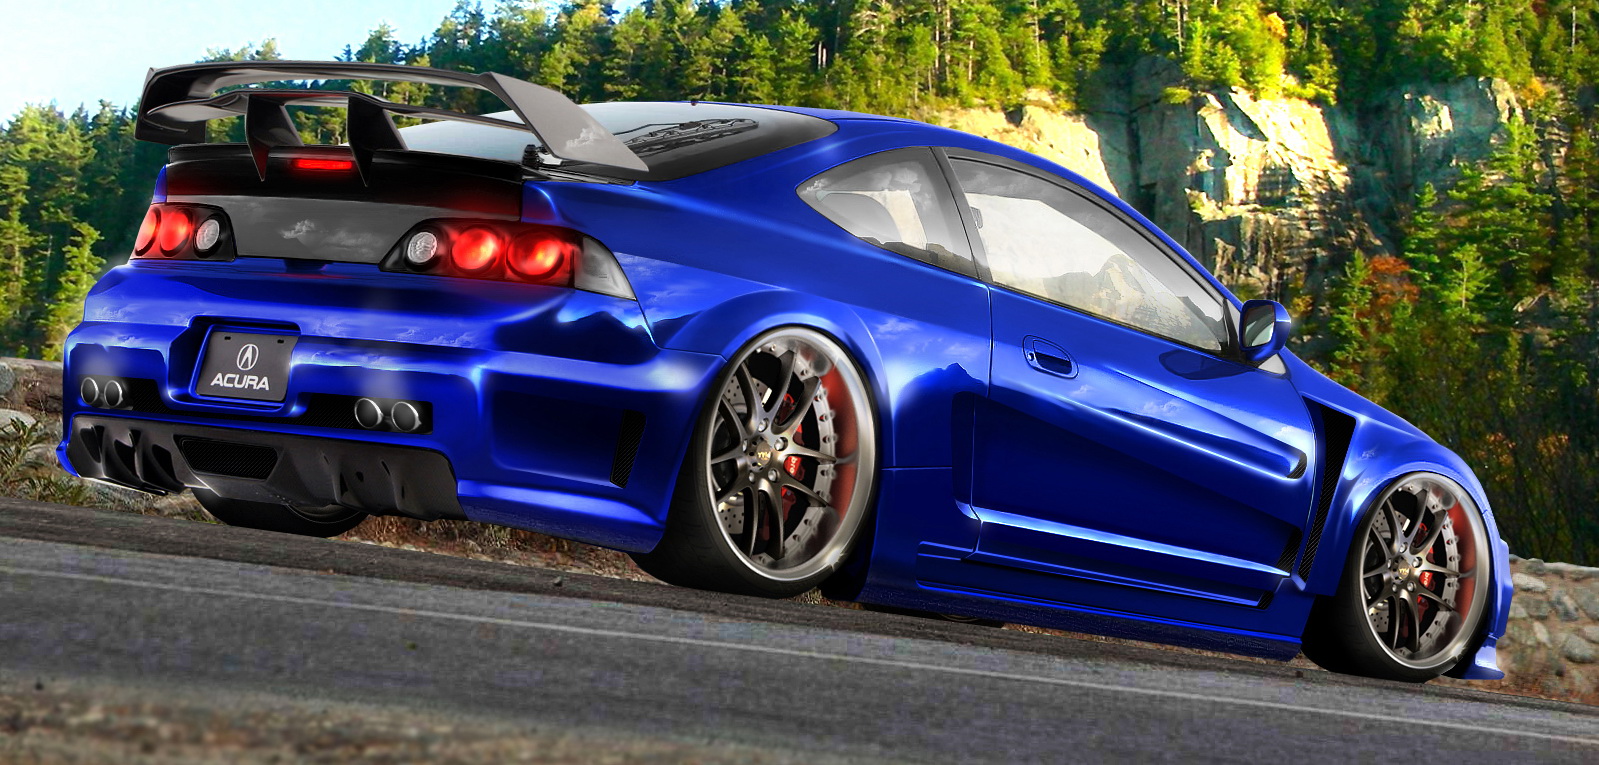 HQ Acura RSX Wallpapers | File 488.71Kb